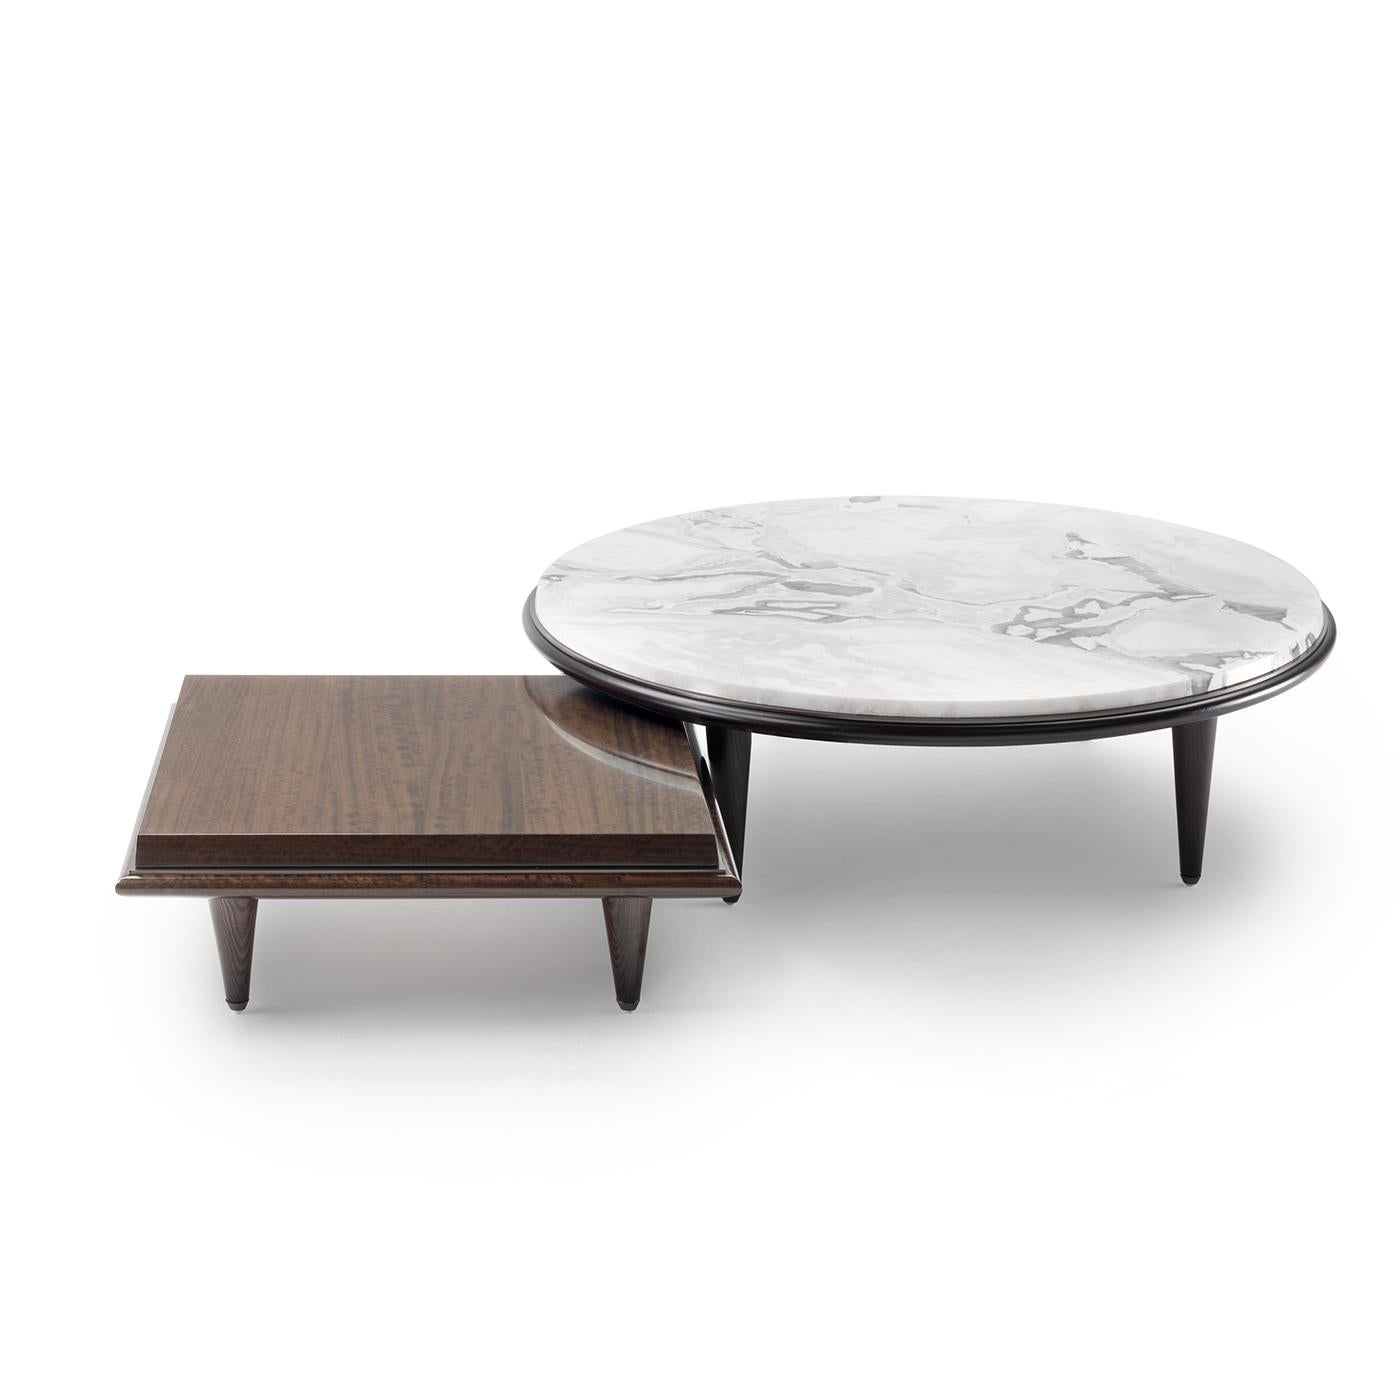 The sleek silhouette defining this coffee table harmoniously fits in a wide variety of contemporary interior decors. Resting on three tapered wooden legs with a eucalyptus-stained finish, this sophisticated design features a sturdy round white Dover